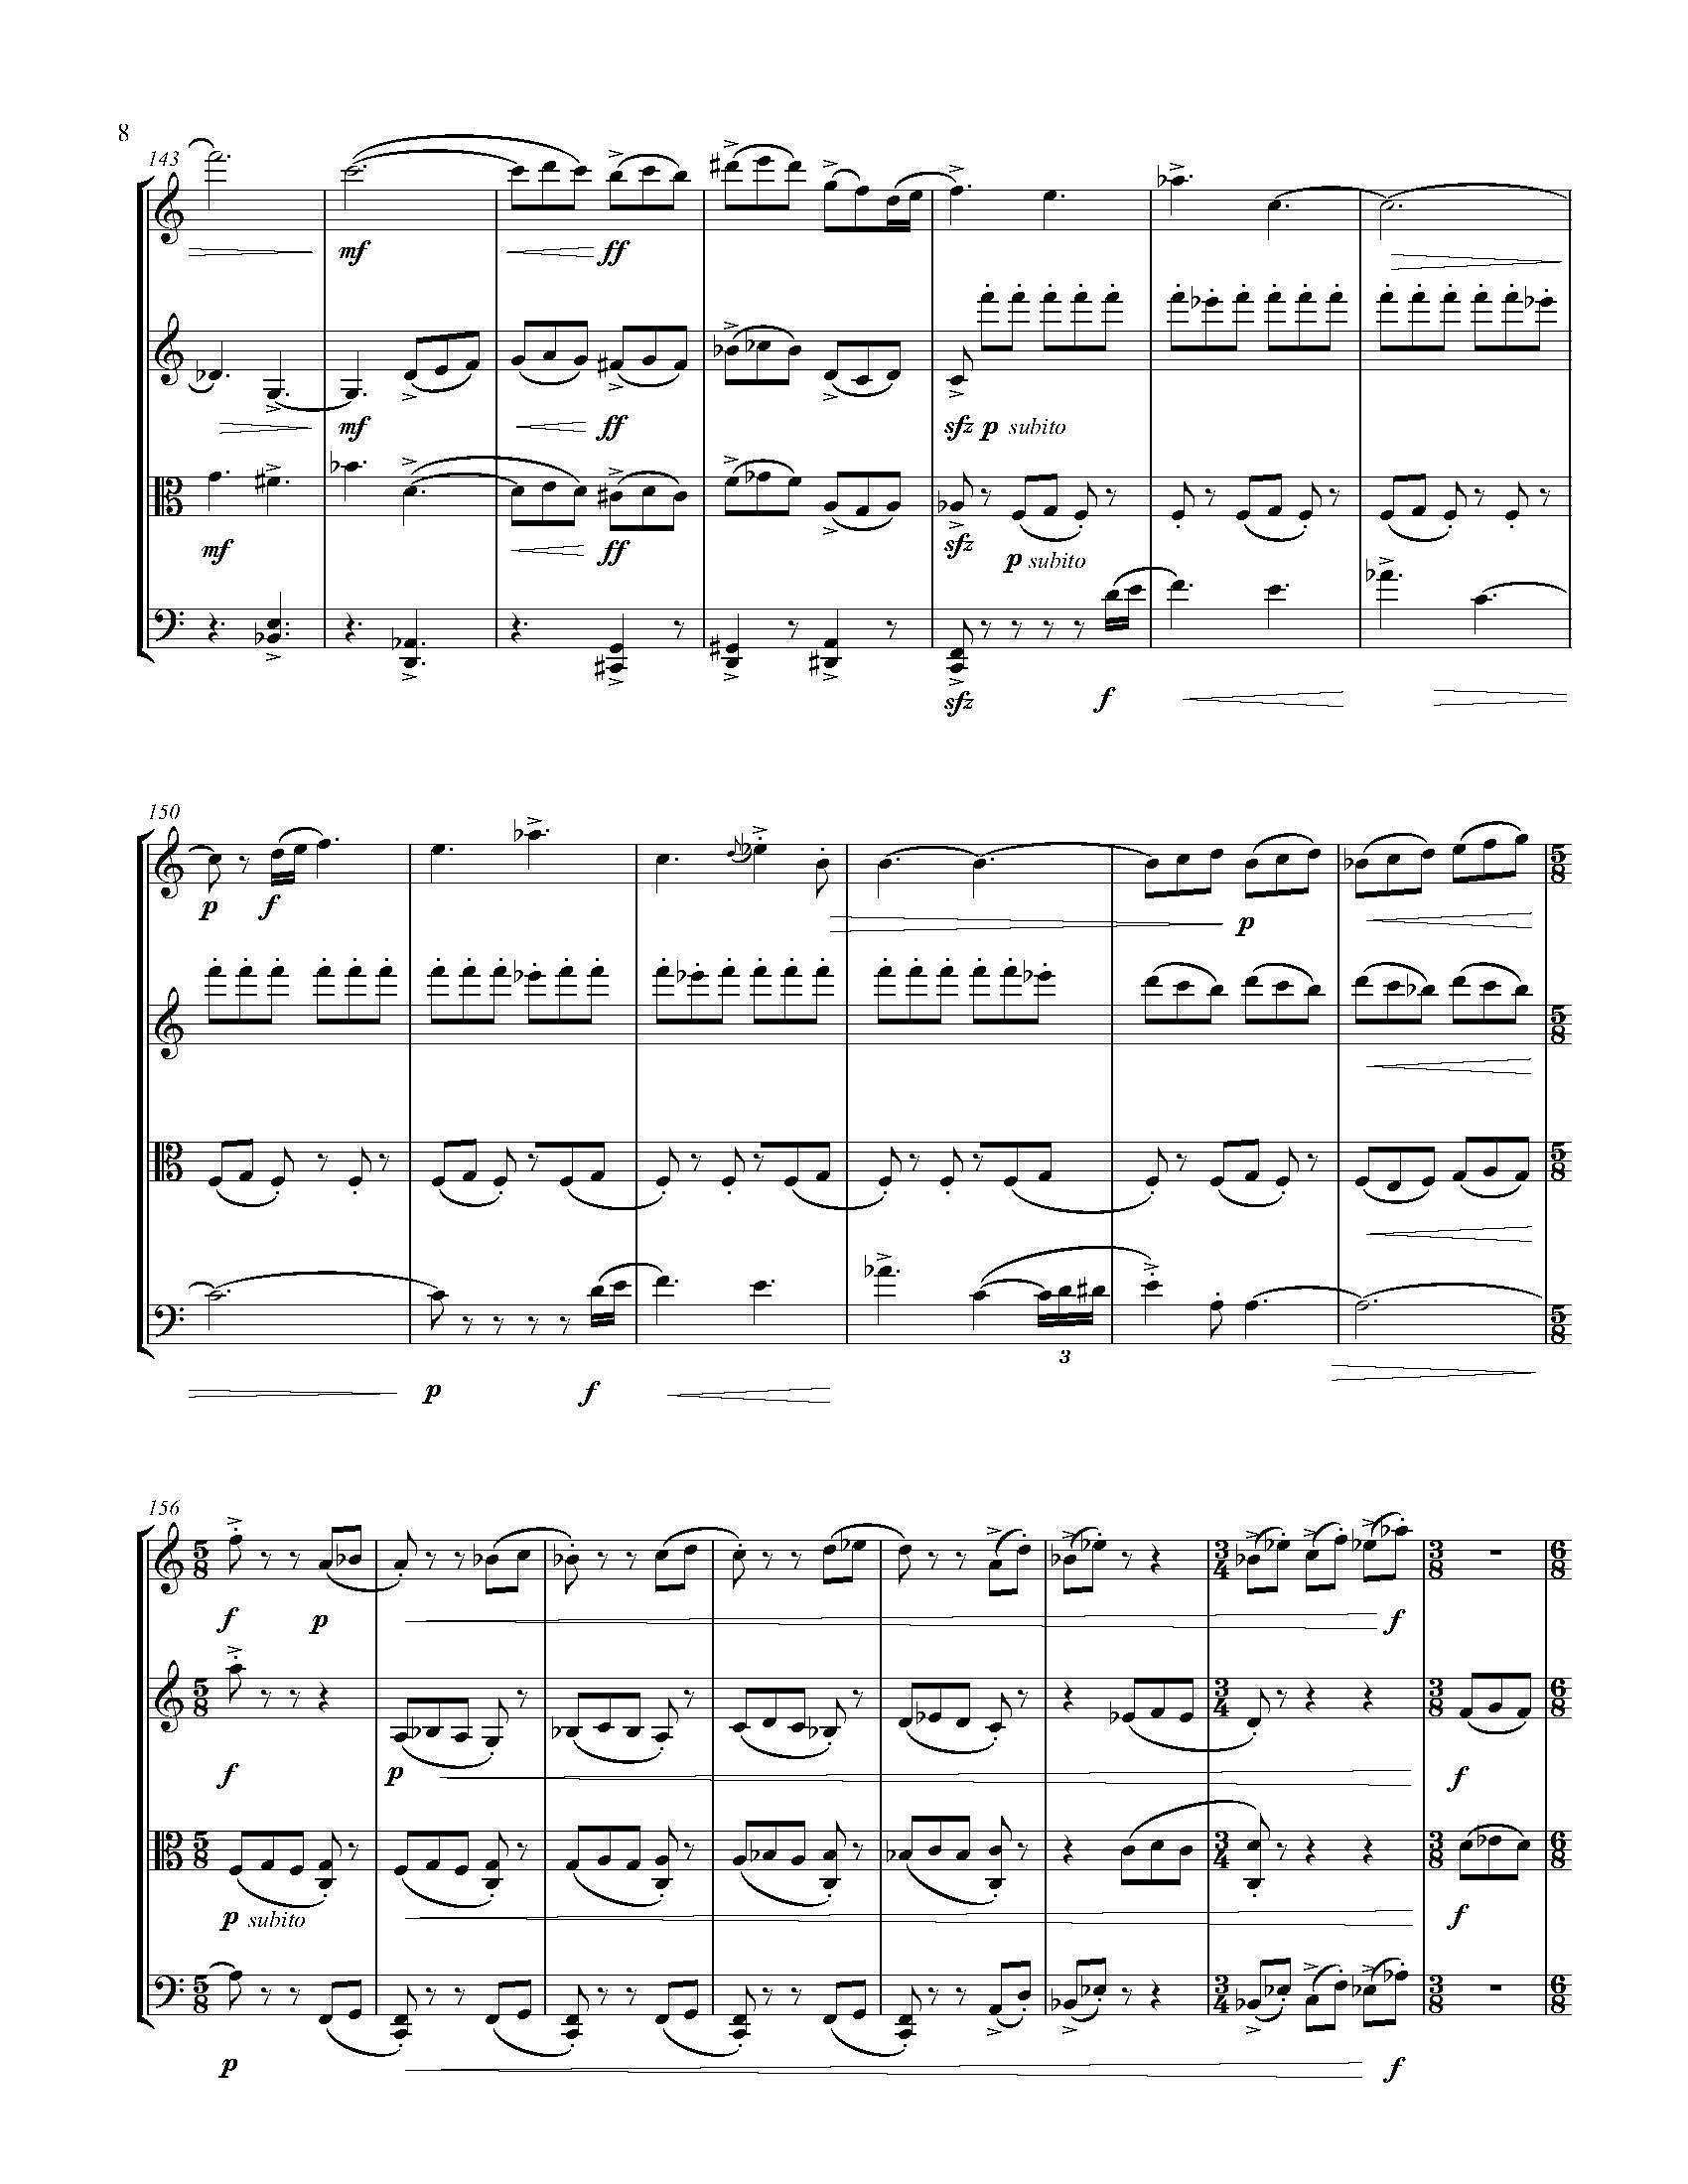 A Country of Vast Designs - Complete Score_Page_14.jpg